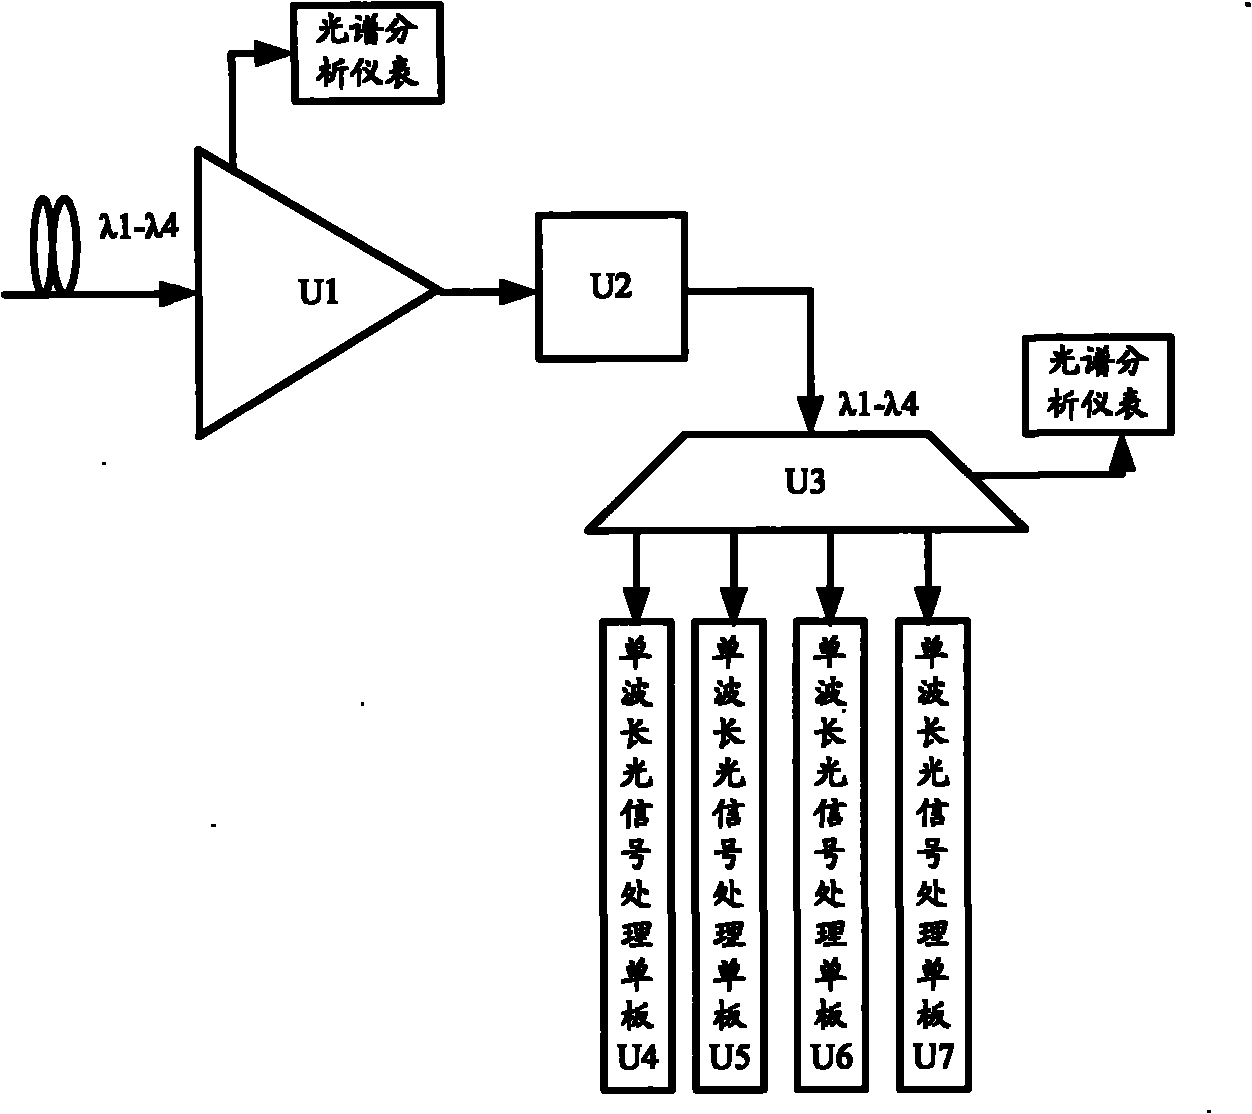 Optical fiber connection relation checking method and device